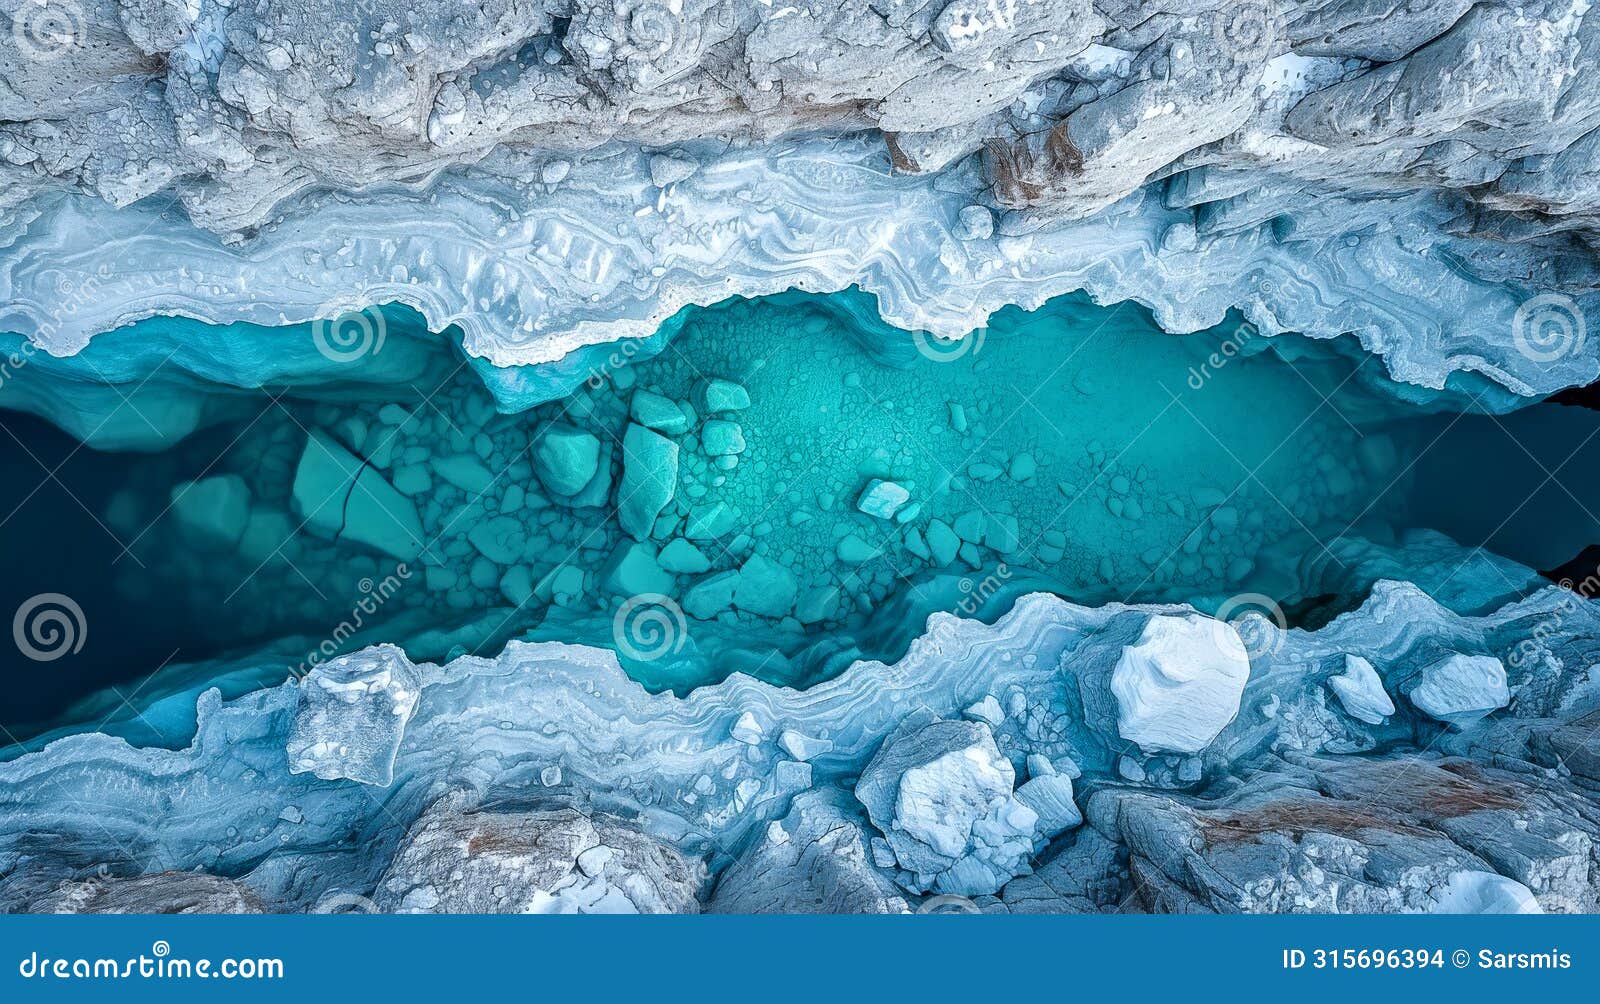 turquoise river flowing through snowy cliffs in a mountainous region.glacial meltwater river